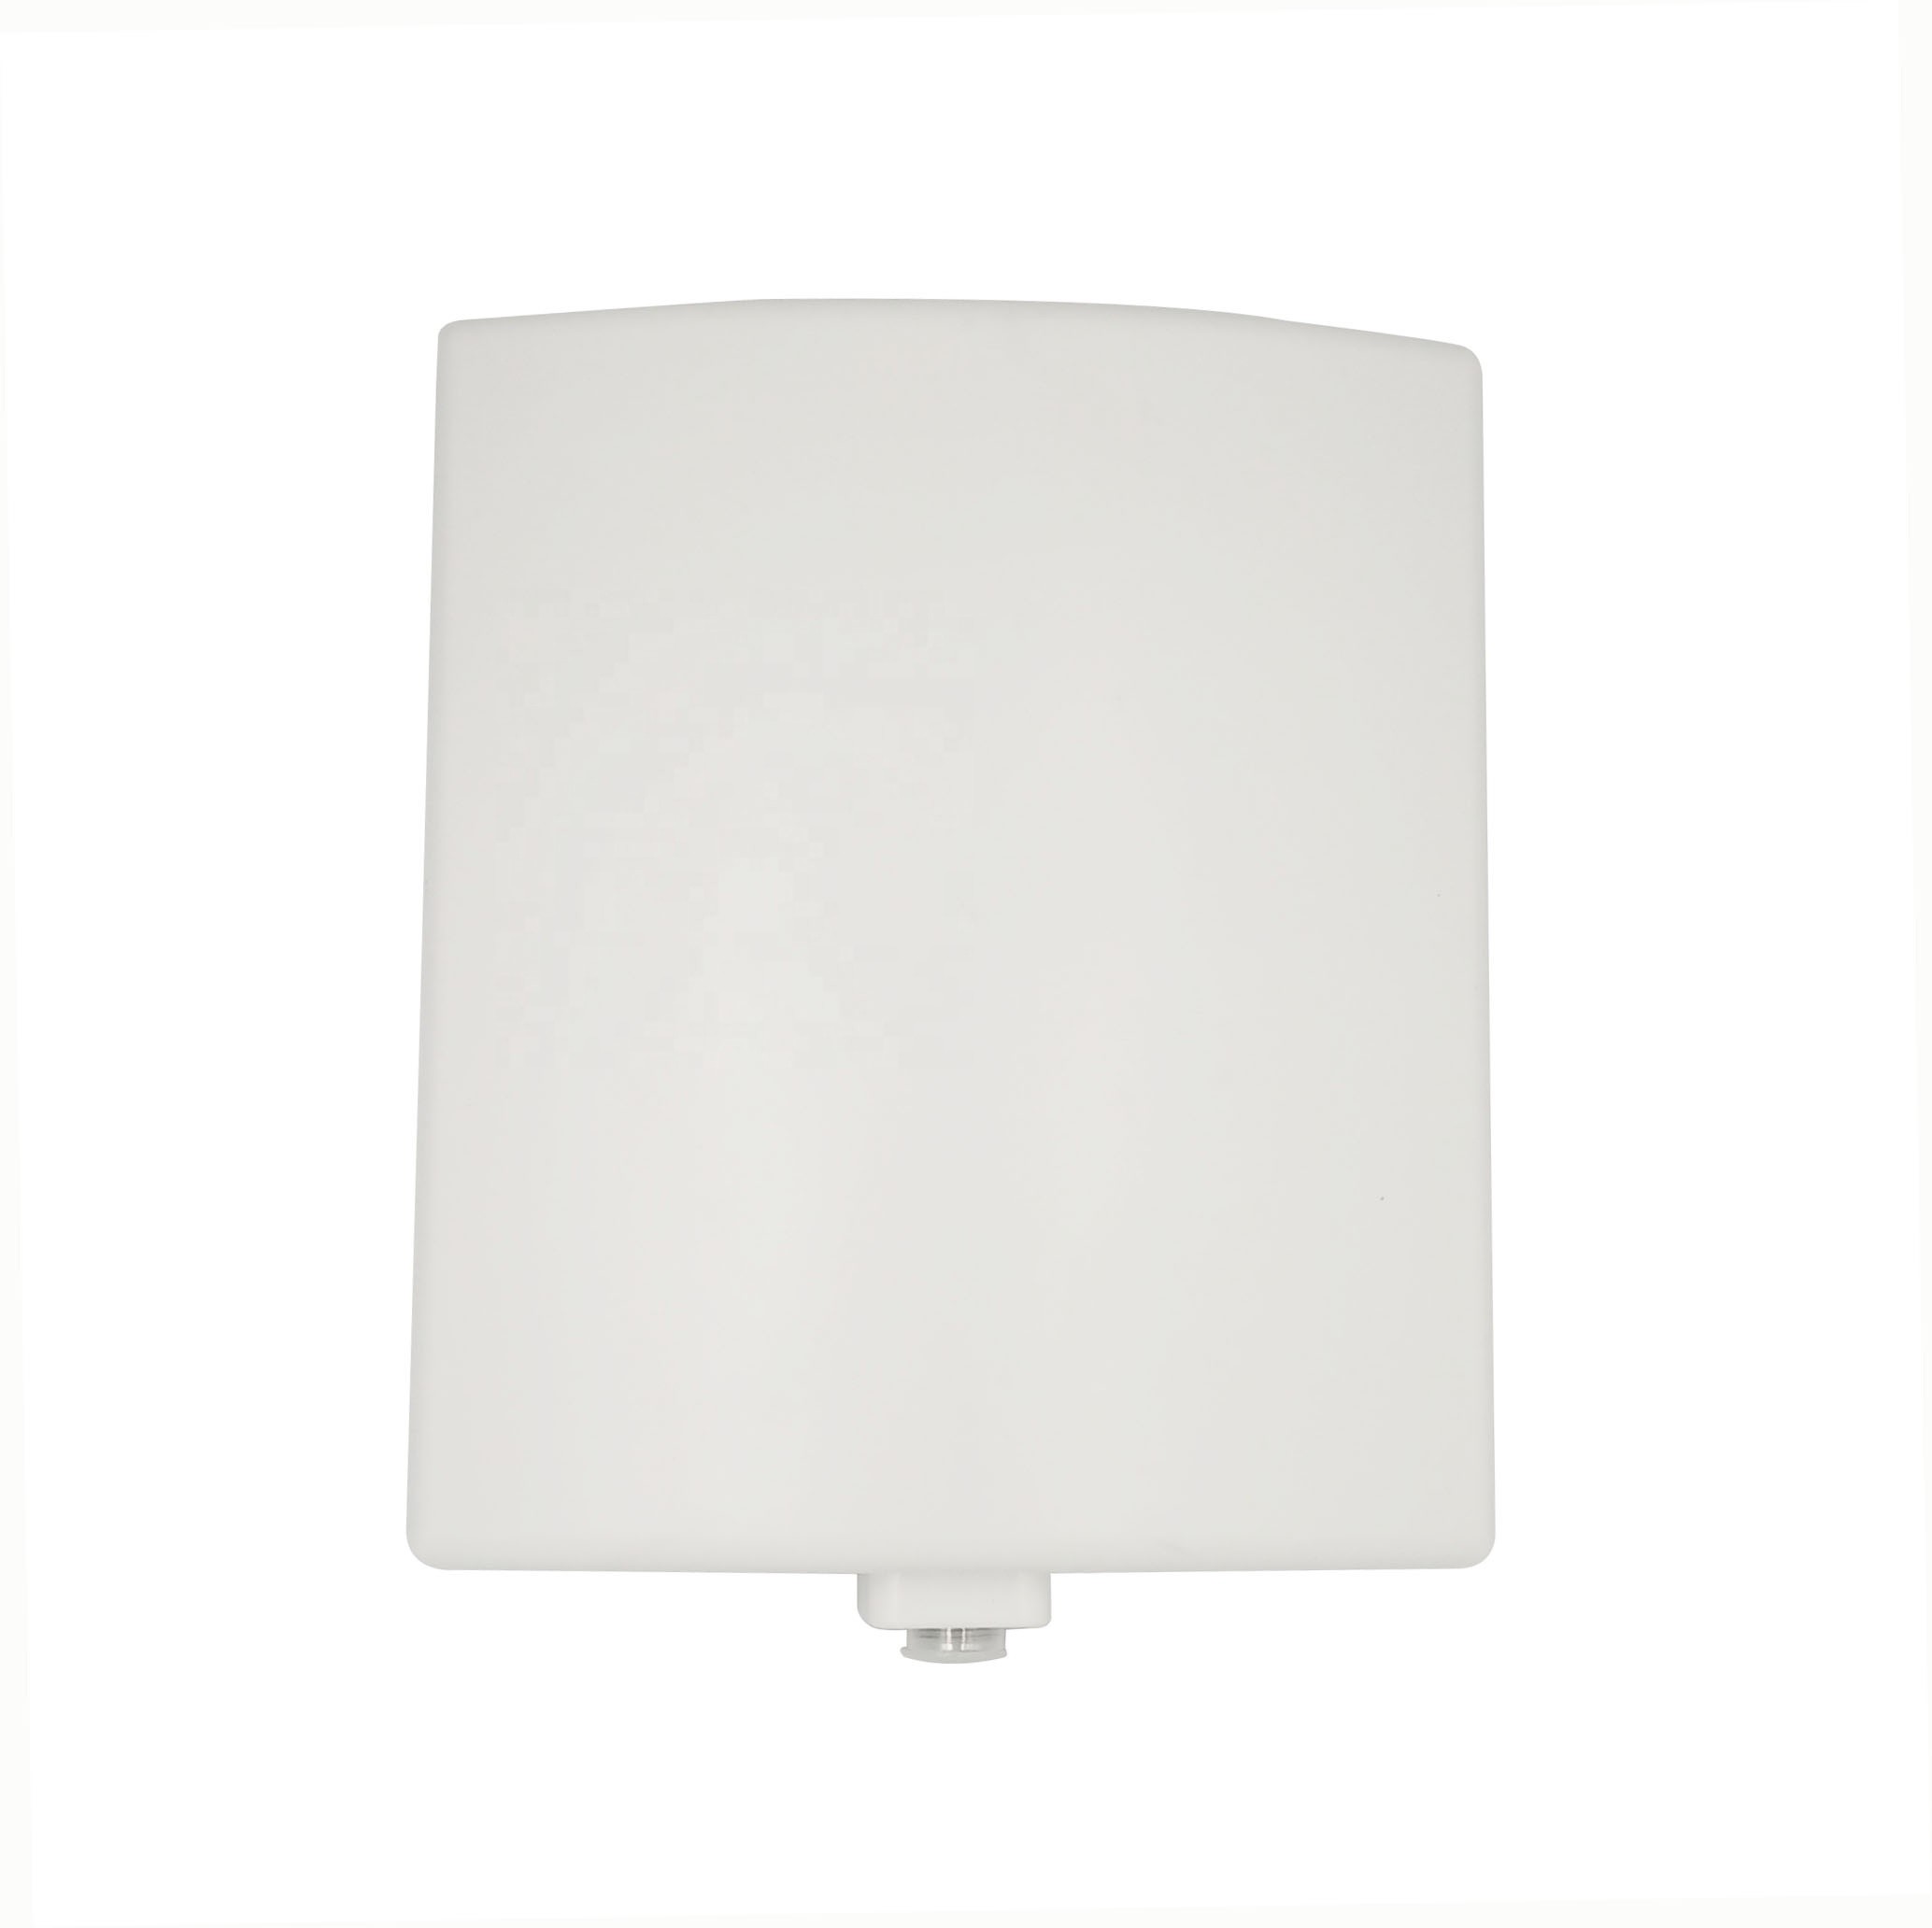 China 223mm*194mm*46mm Panel Size 18dBi Gain 4G LTE MIMO External Antenna for Base Station factory